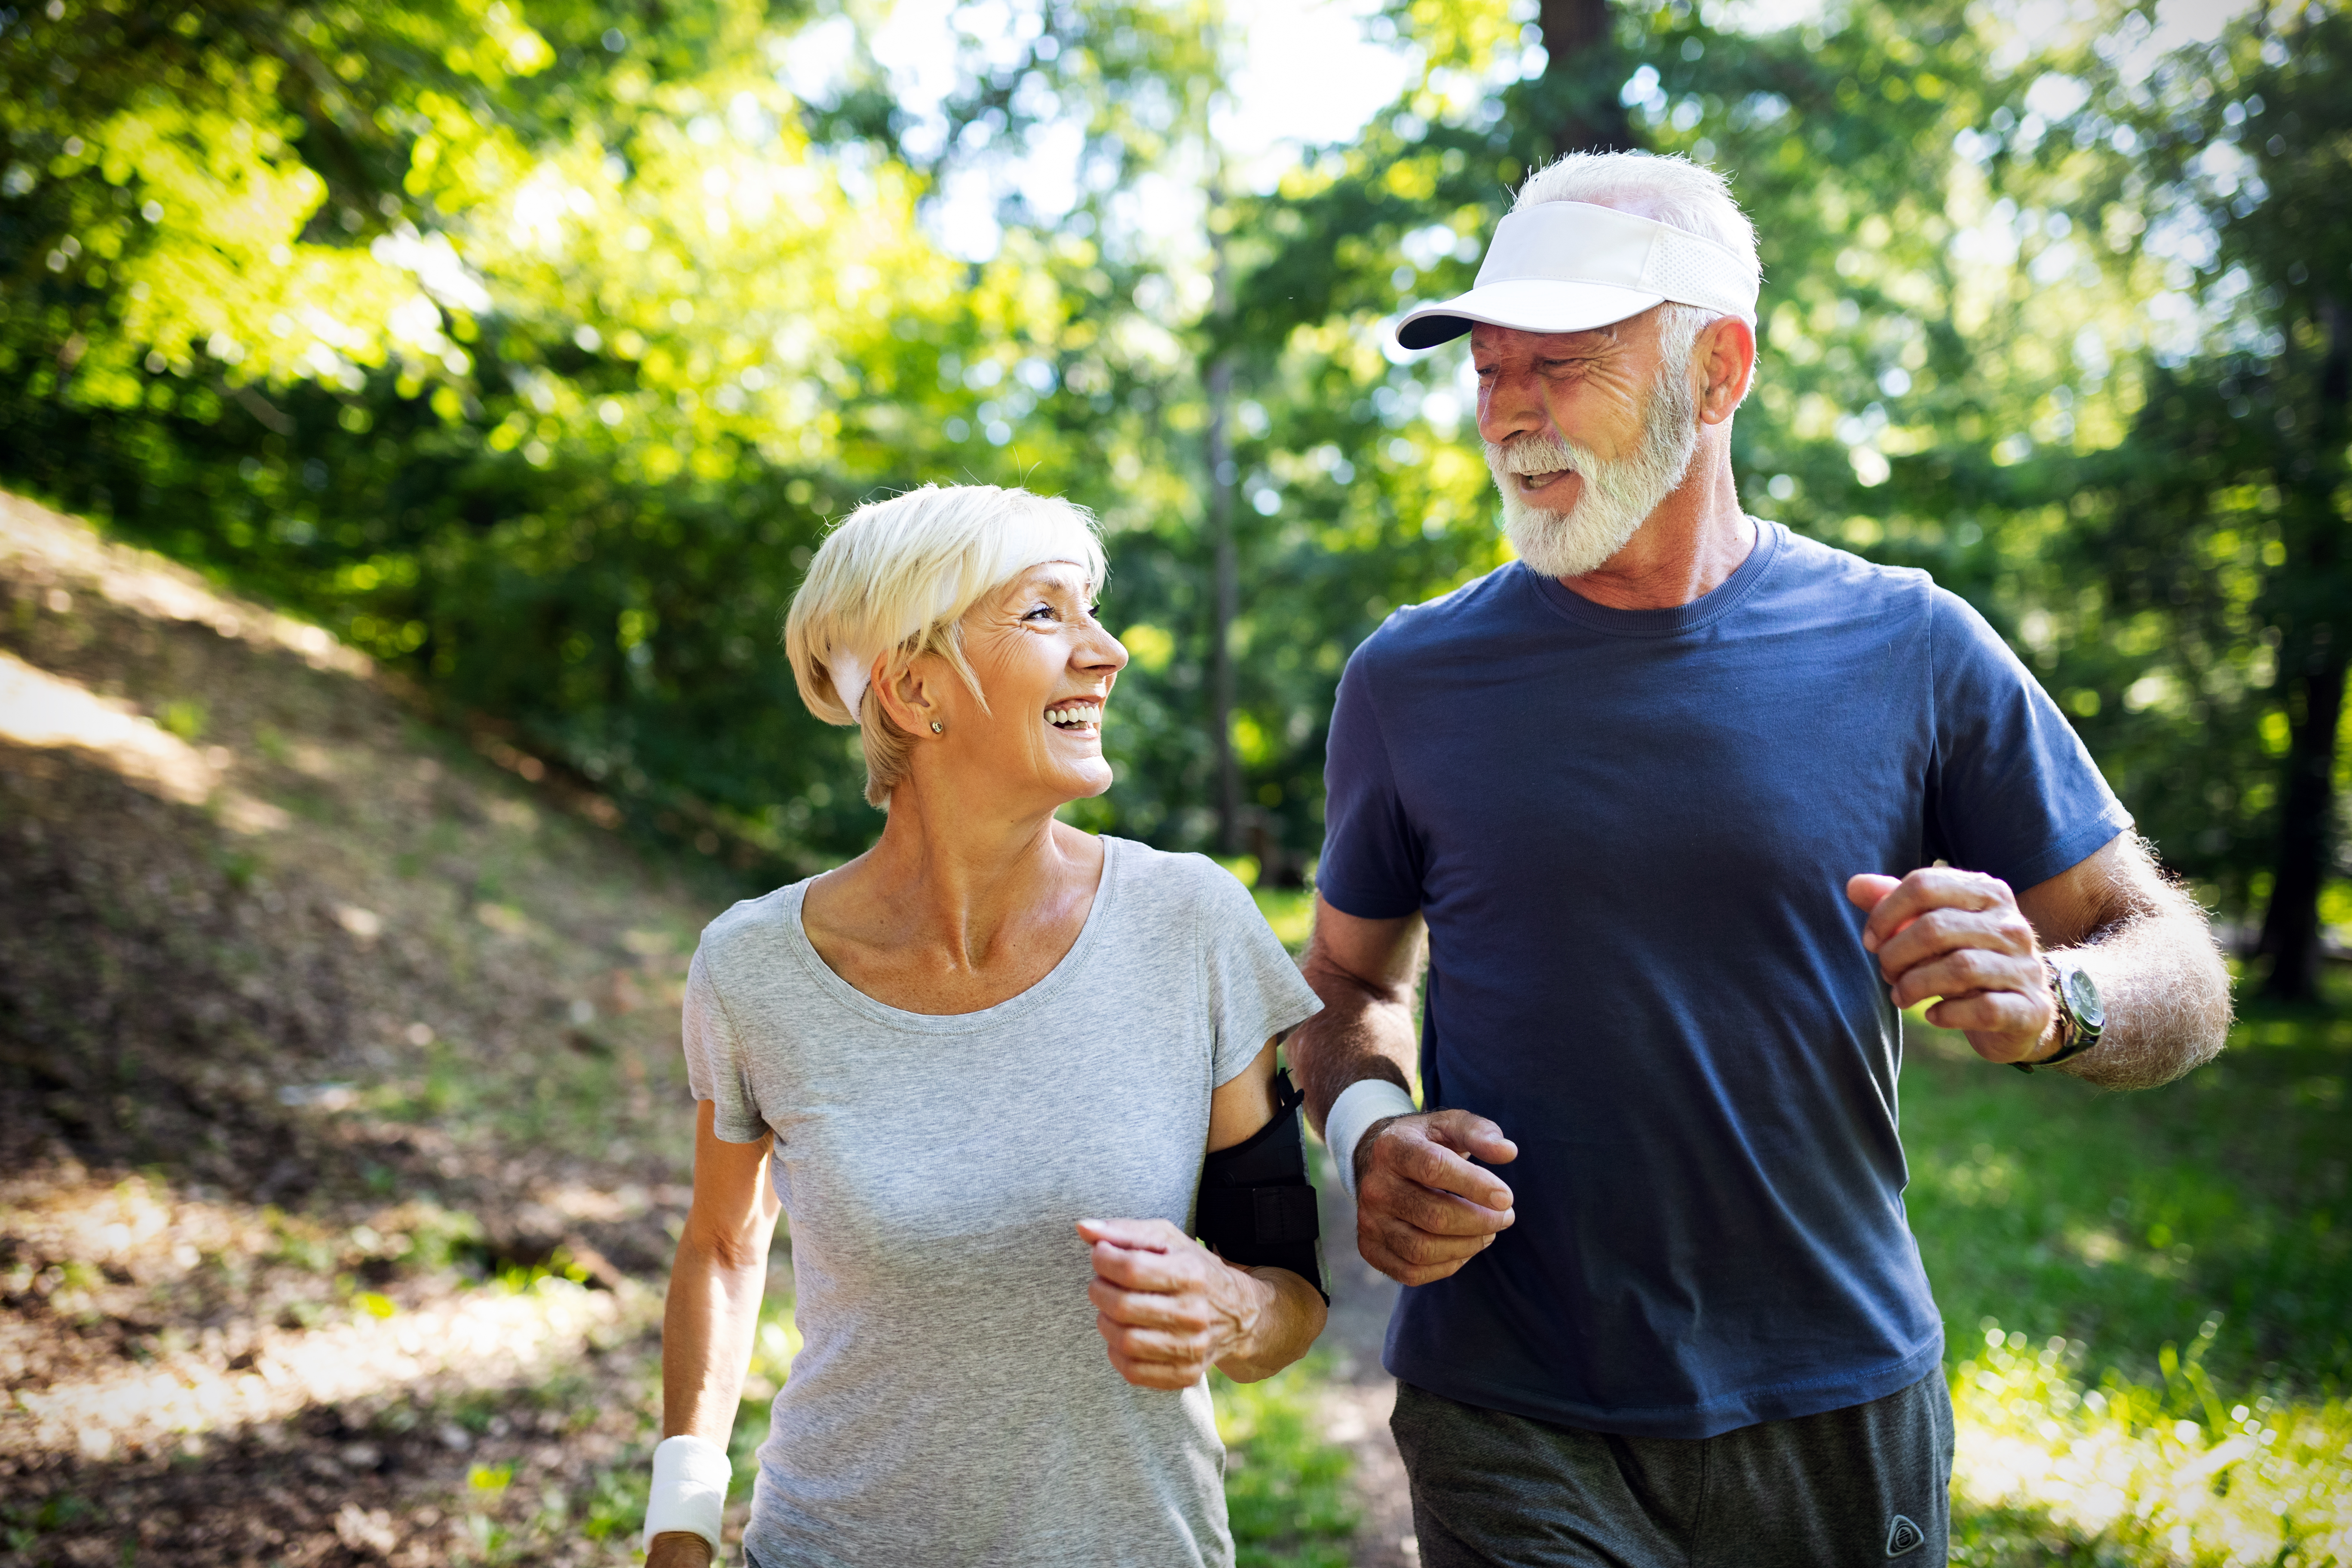 An older woman and man run in a park. Choosing the right nutrition for older runners can help them stay active.